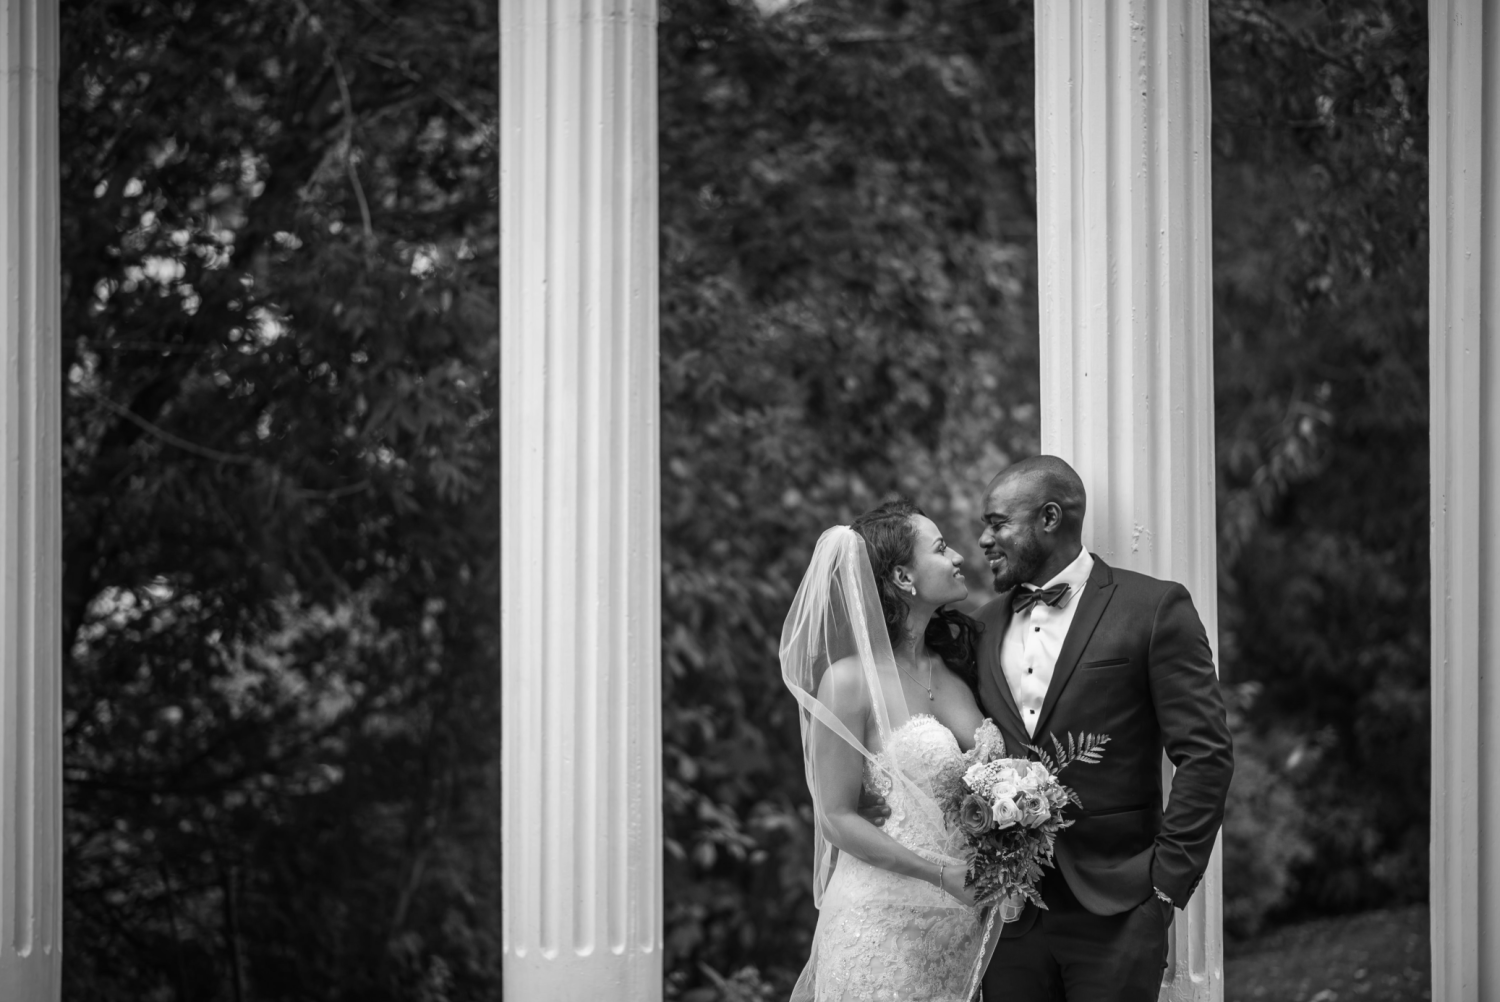 The happy couple, John and Veronica, standing outside, in front of white columns, in a black and white photo.